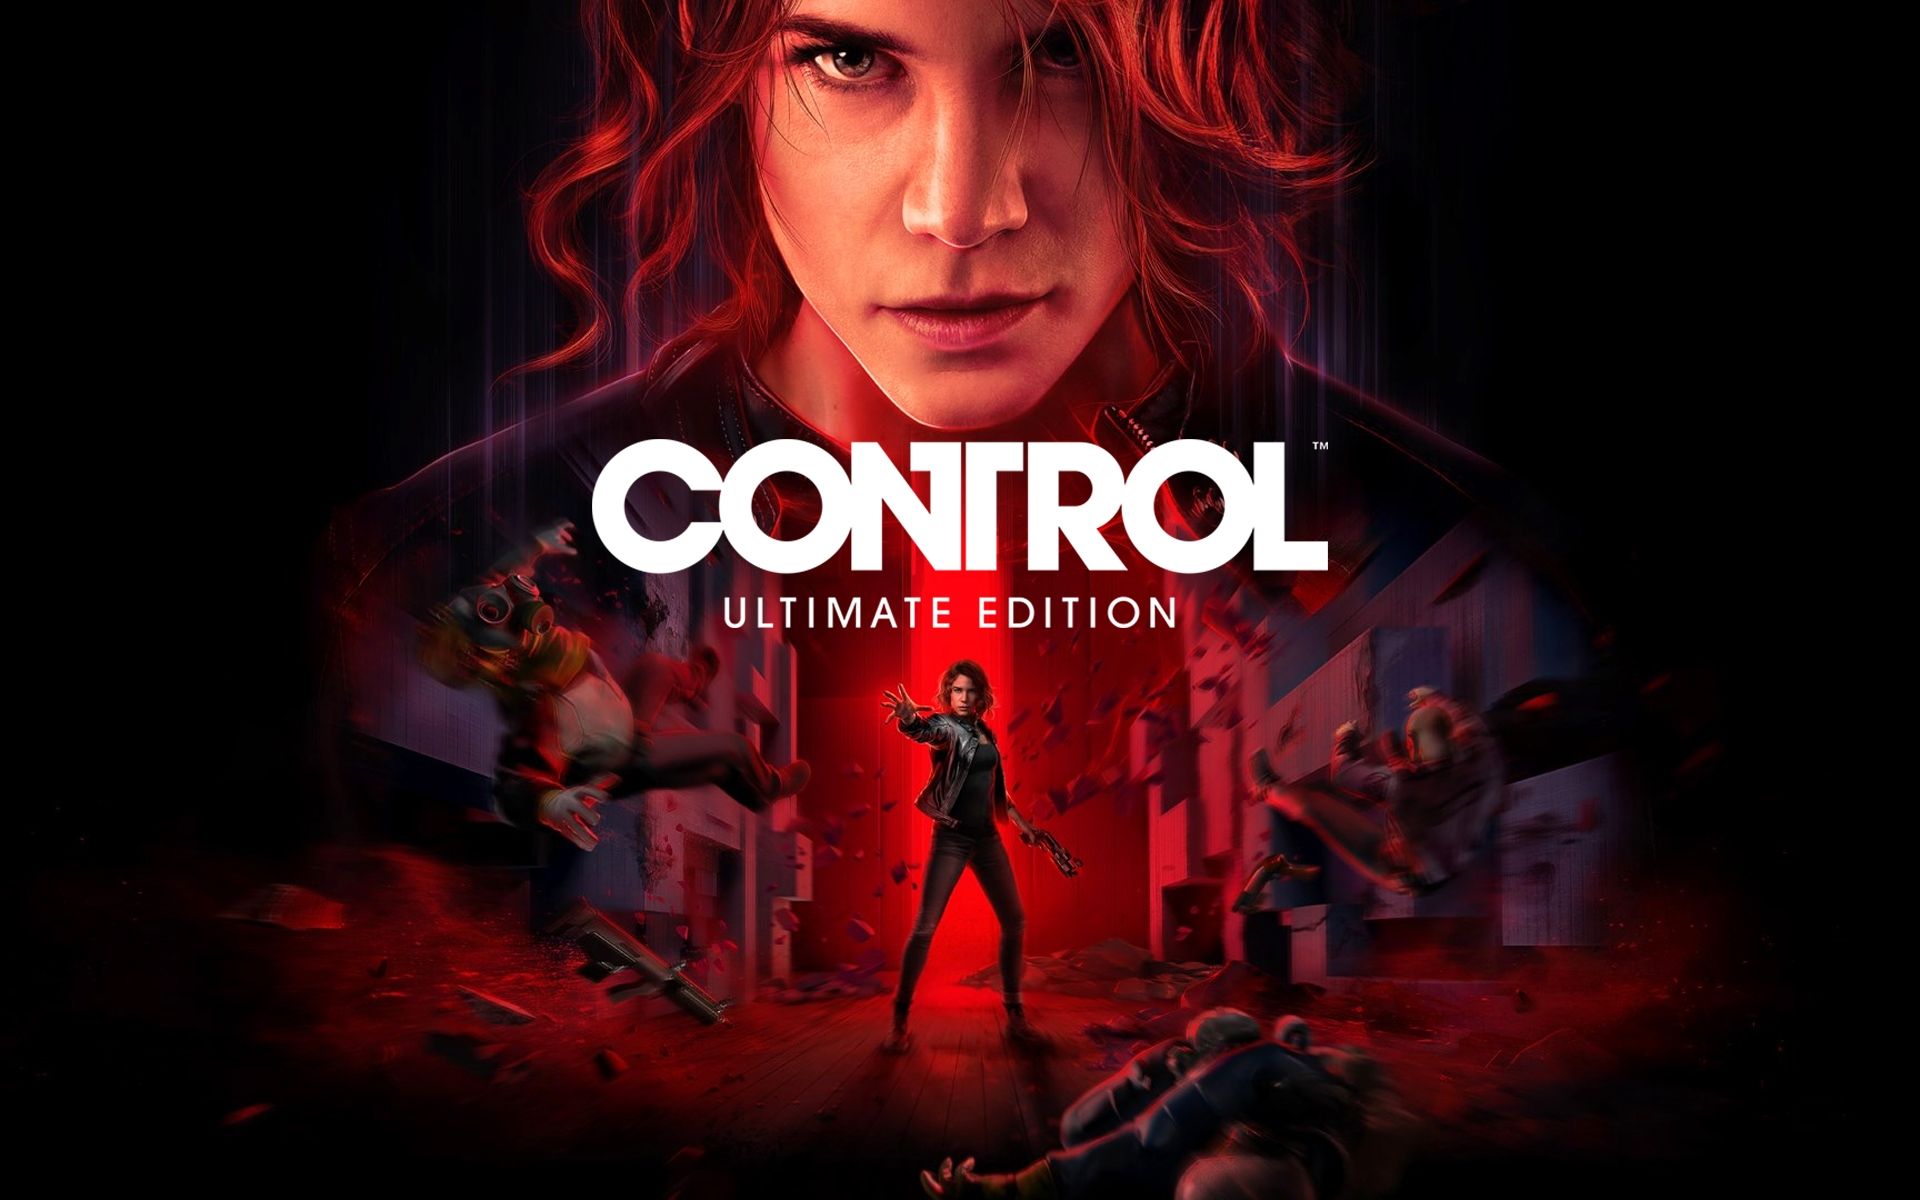 Control Ultimate Edition showing Jesse Faden the protagonist